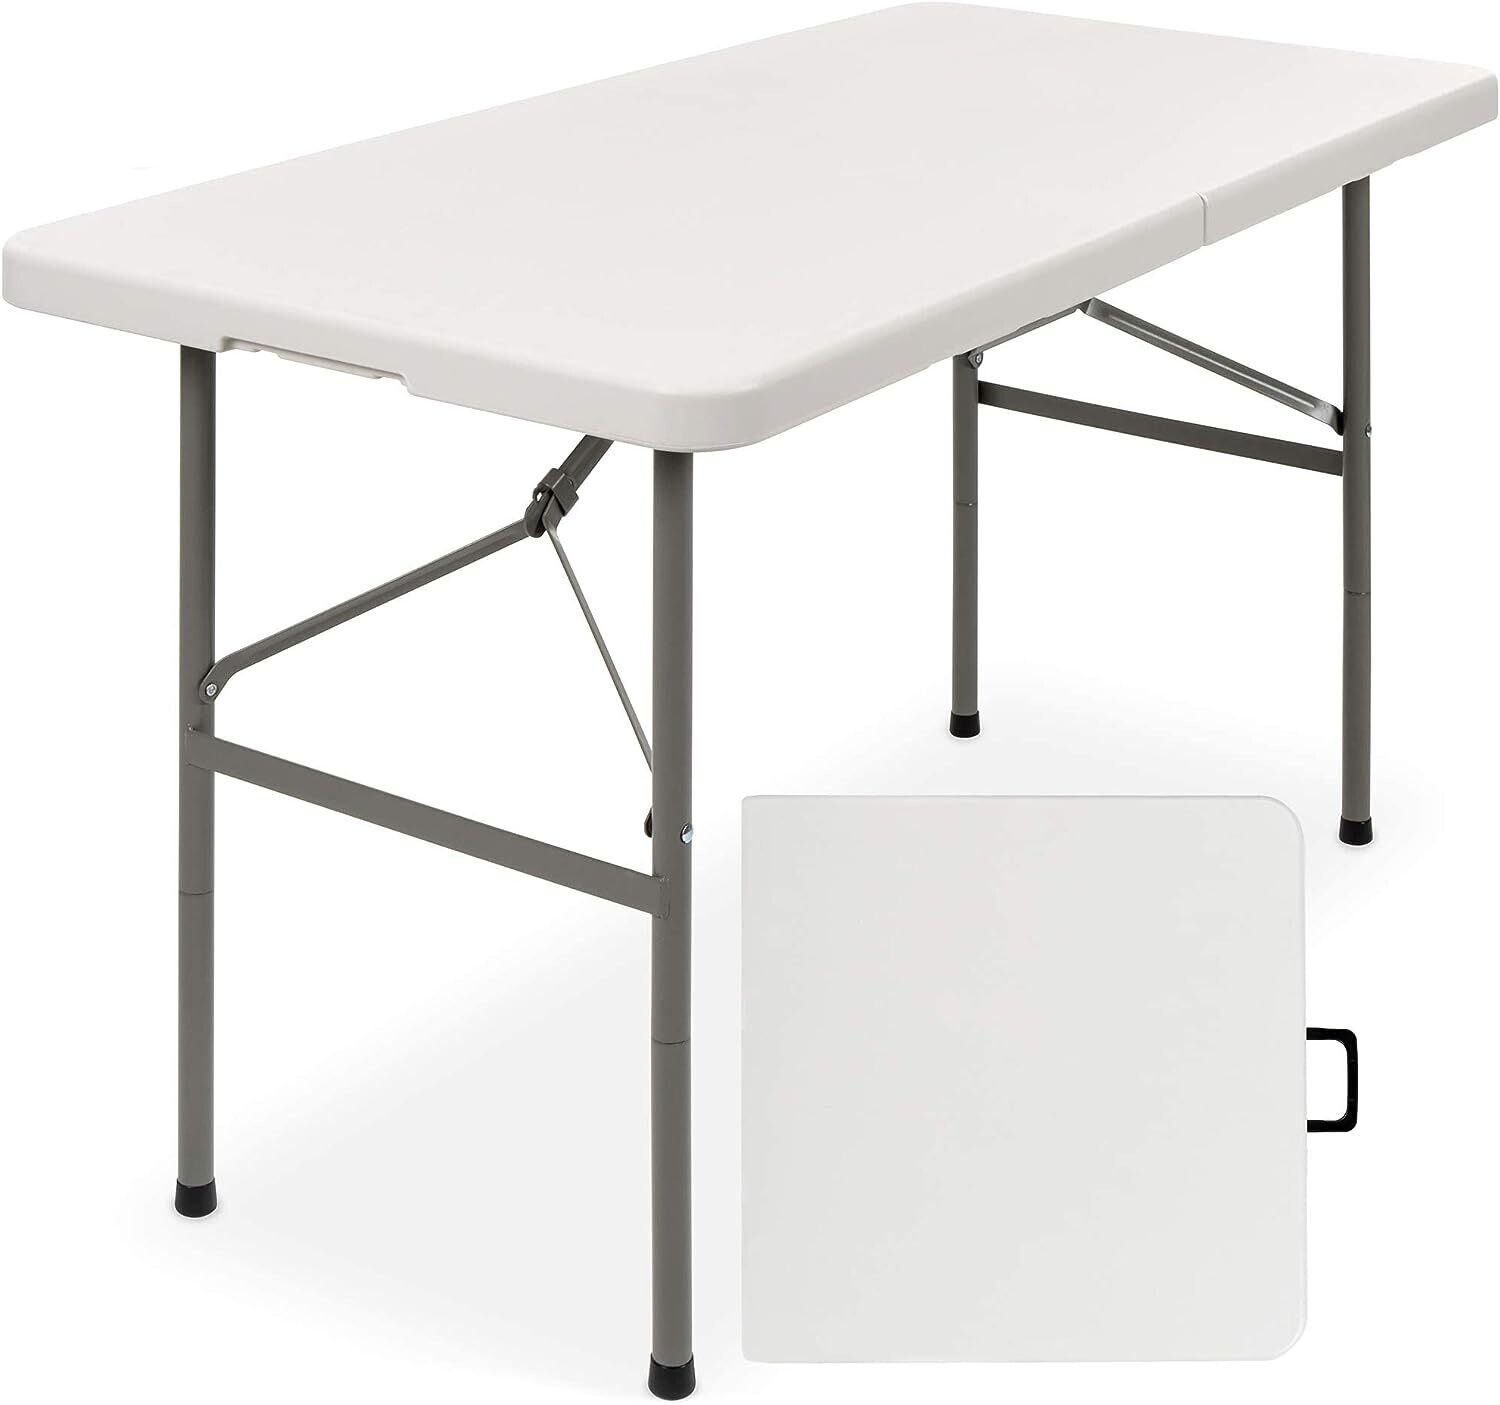 Strong Foldable Table in plastic Length 1.5m capacity 130kg Medium